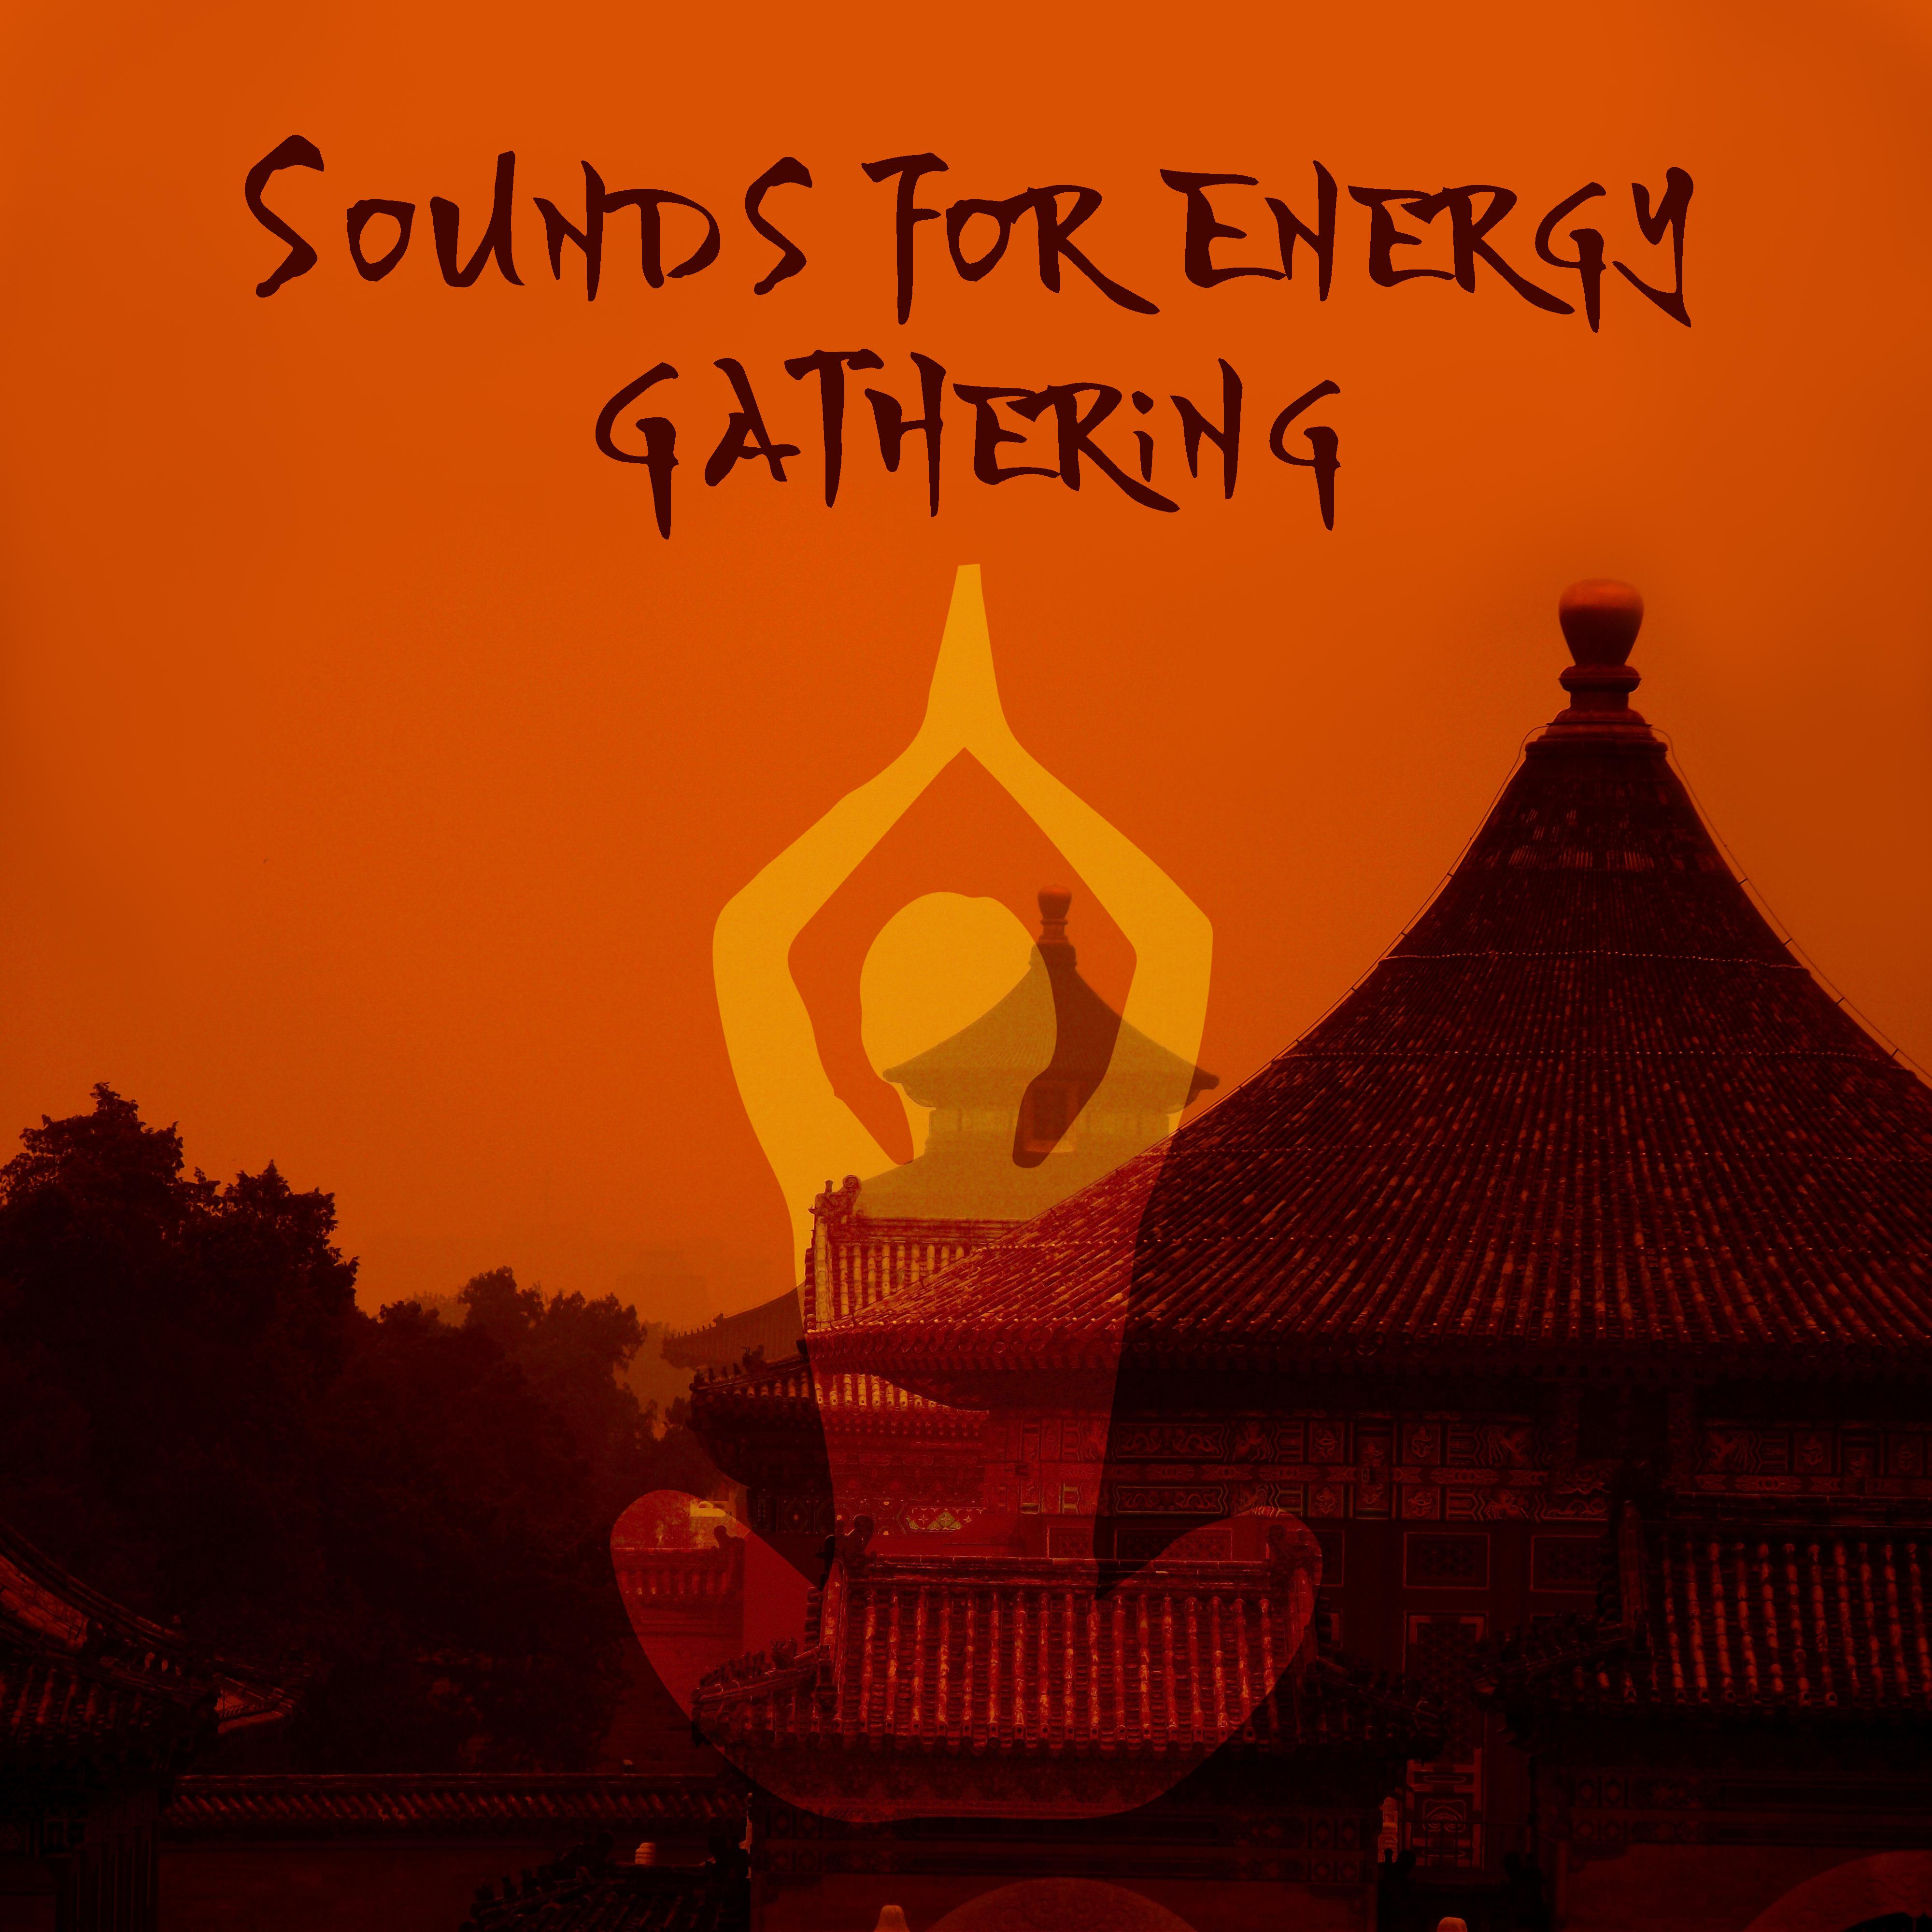 Sounds for Energy Gathering